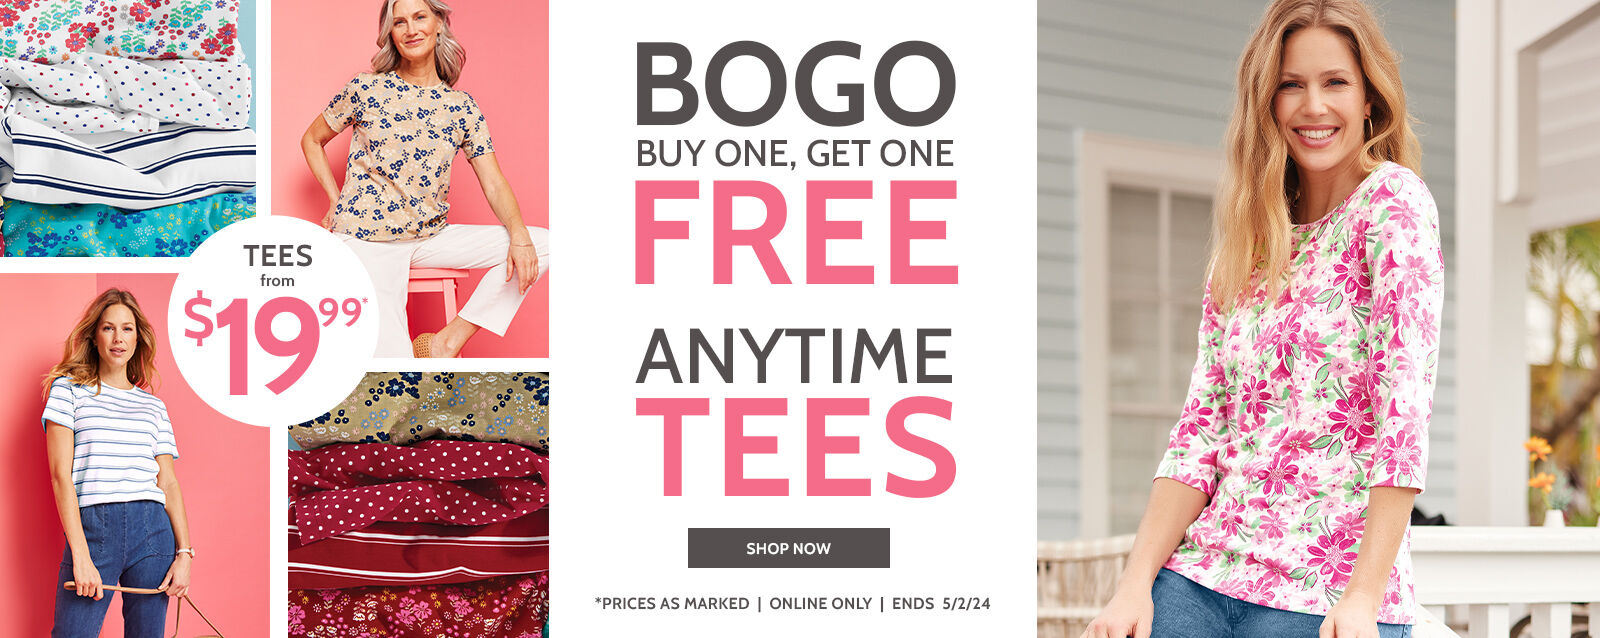 bogo BUY one, get one free anytime tees shop now tees from $19.99* *prcies as marked | online only | ends 5/2/24